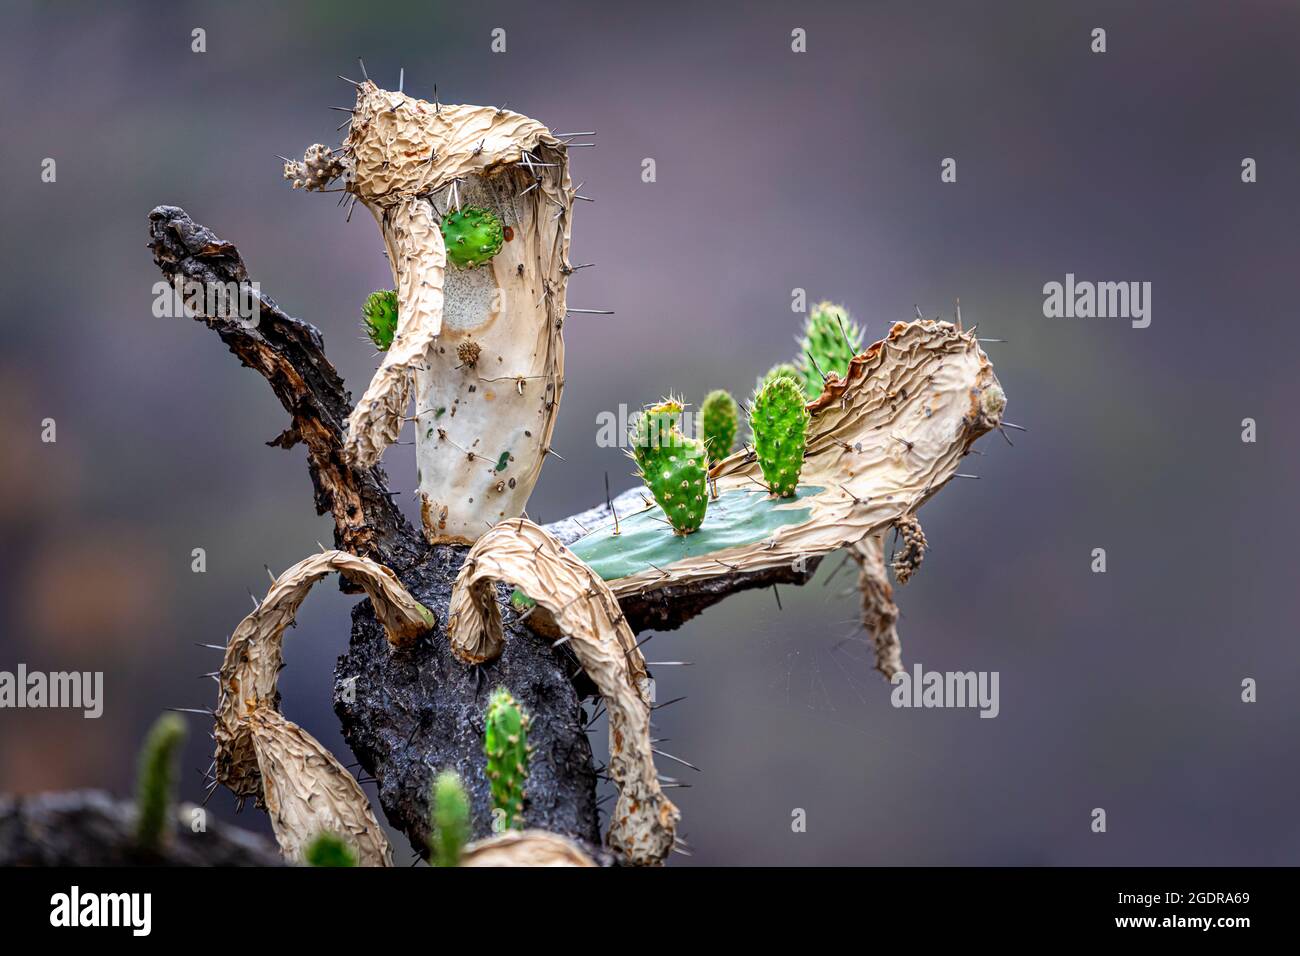 Tiny Prickly Pear cactus grow on a fire damaged adult near Morelia, Michoacan, Mexico. Stock Photo